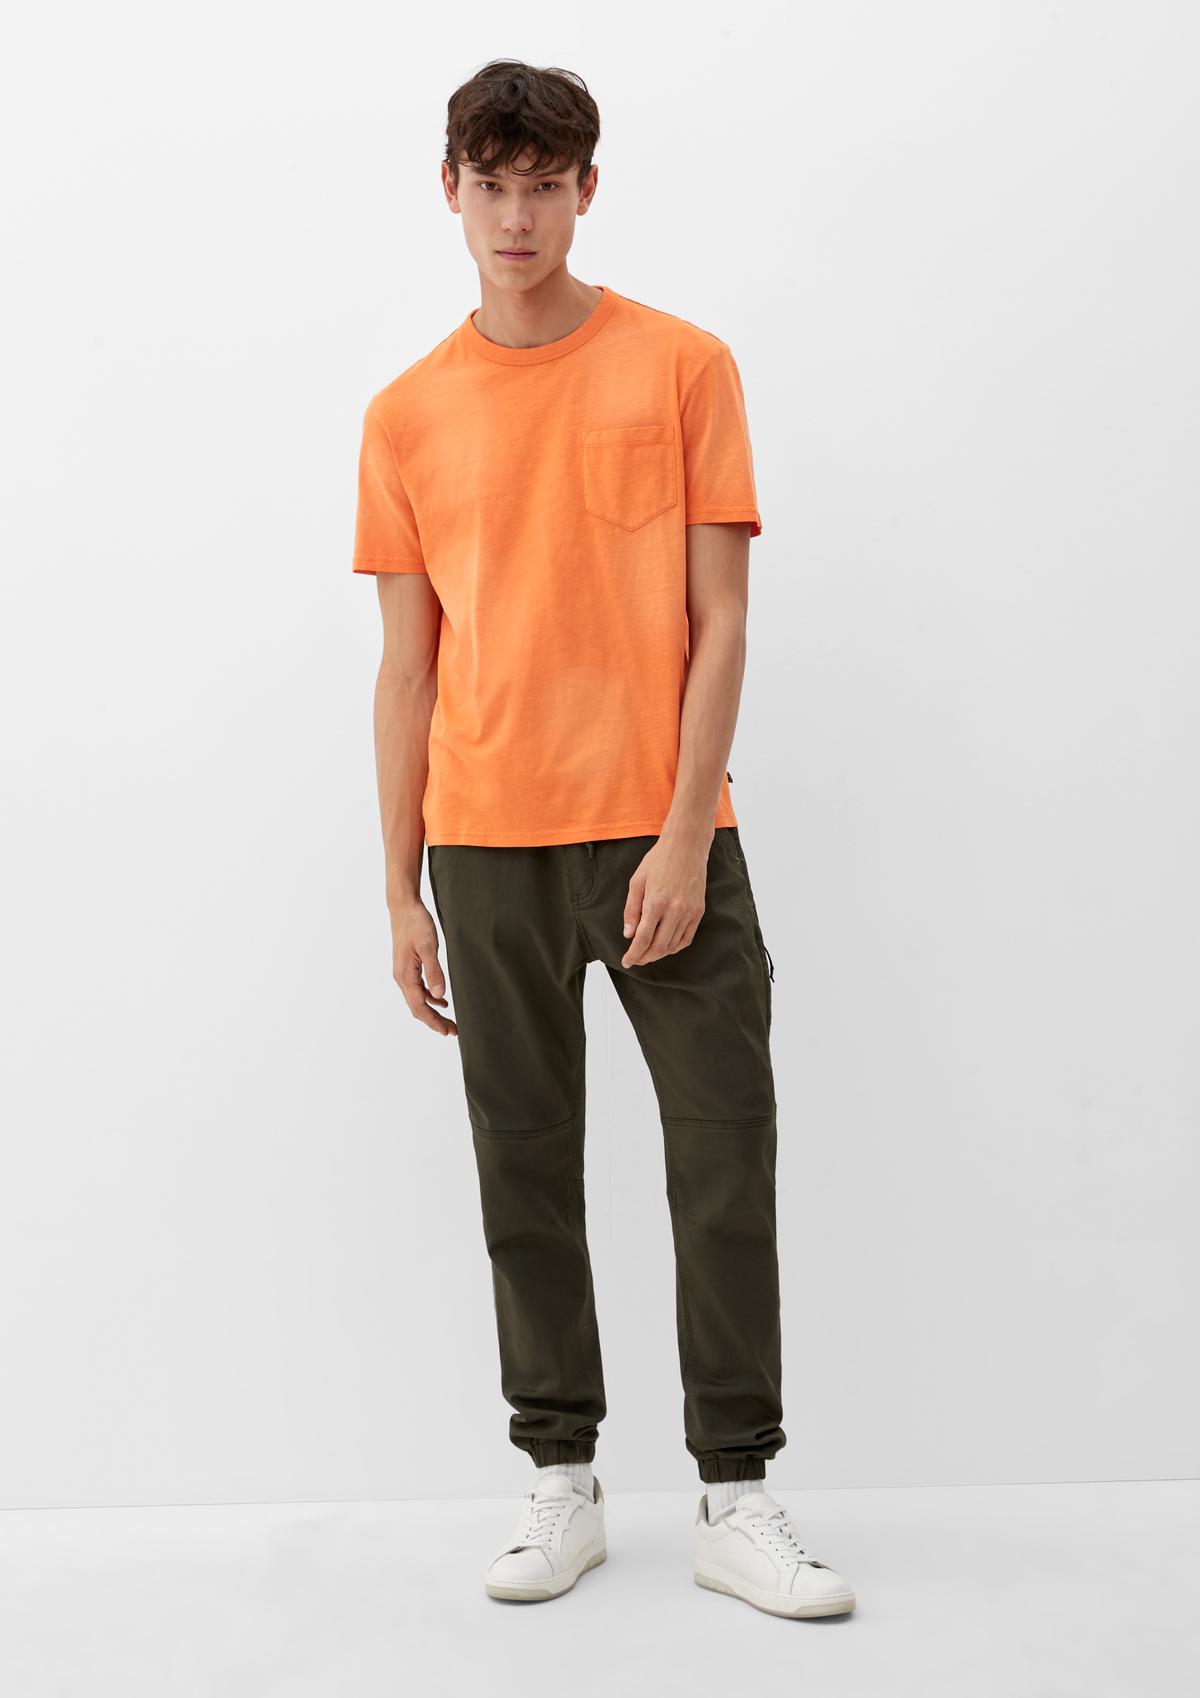 T-shirt with - breast a pocket orange